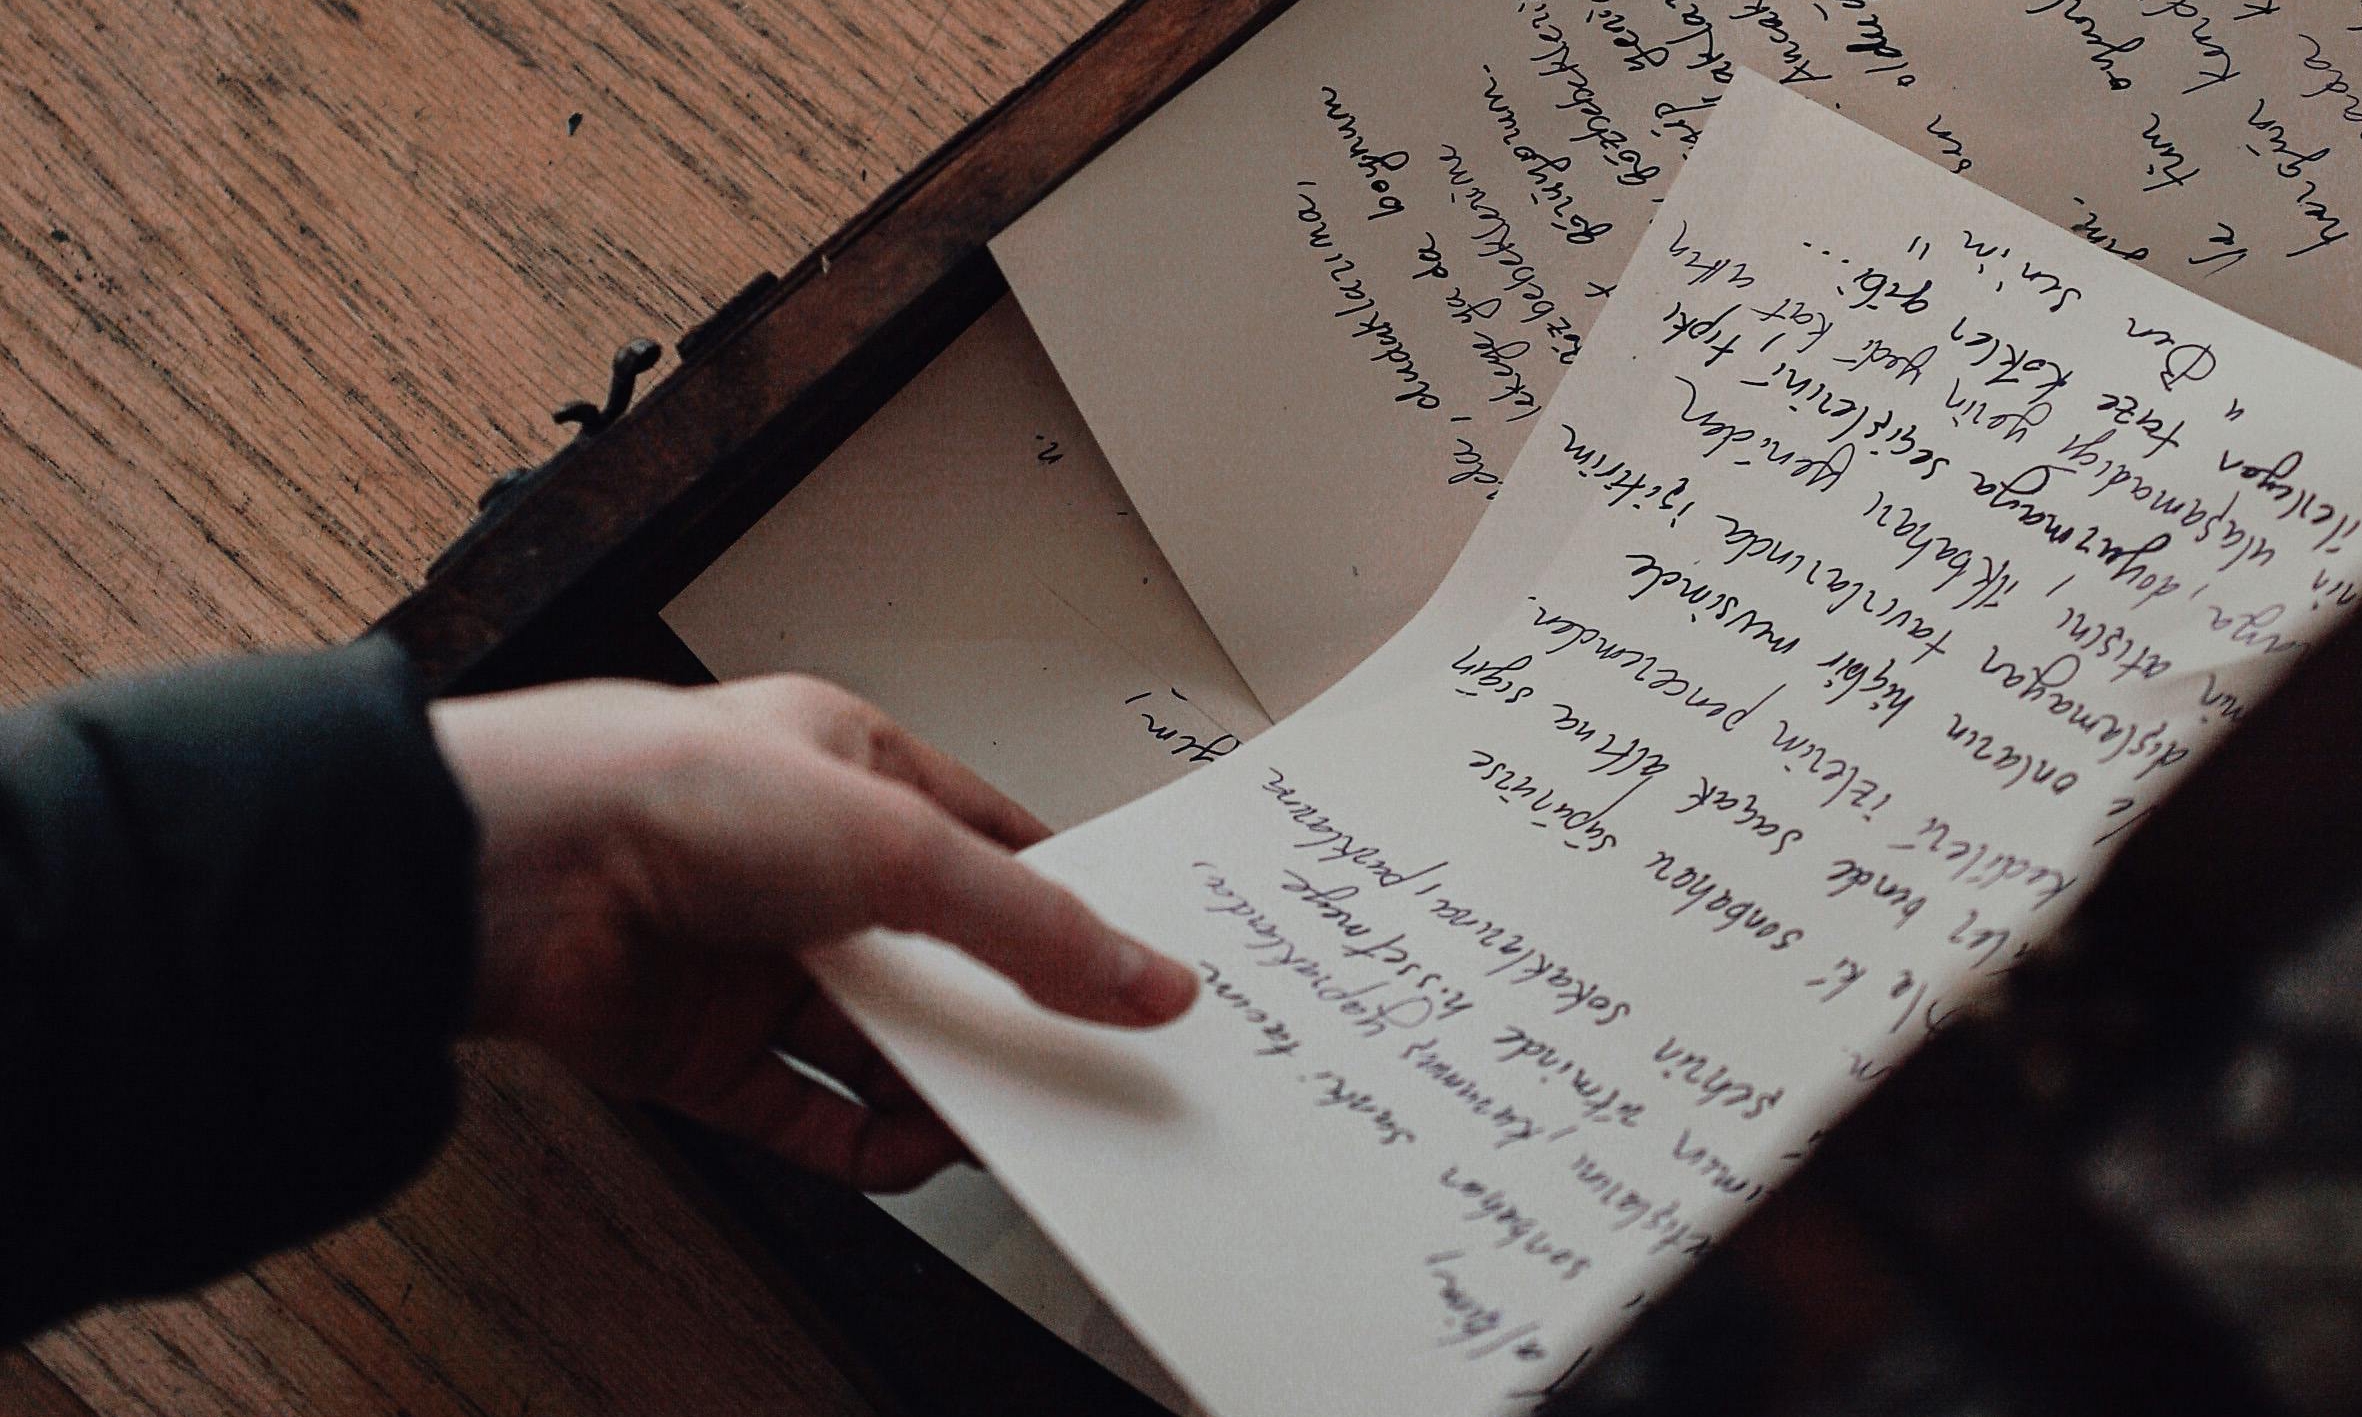 A woman takes up a hand-written letter | Source: Pexels